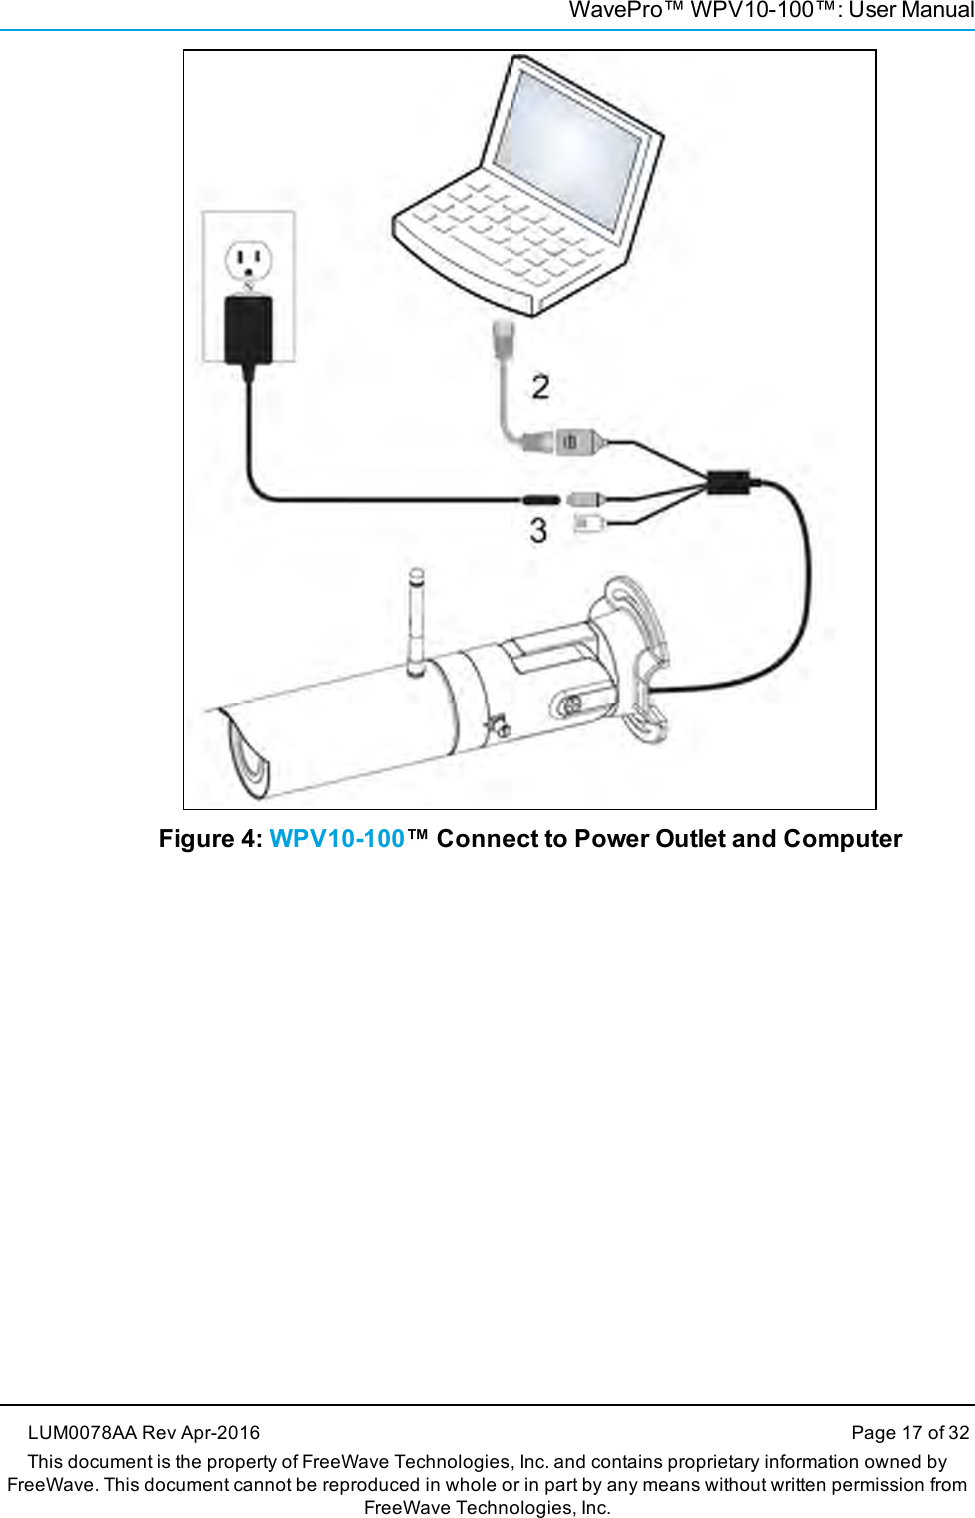 WavePro™ WPV10-100™: User ManualFigure 4: WPV10-100™ Connect to Power Outlet and ComputerLUM0078AA Rev Apr-2016 Page 17 of 32This document is the property of FreeWave Technologies, Inc. and contains proprietary information owned byFreeWave. This document cannot be reproduced in whole or in part by any means without written permission fromFreeWave Technologies, Inc.